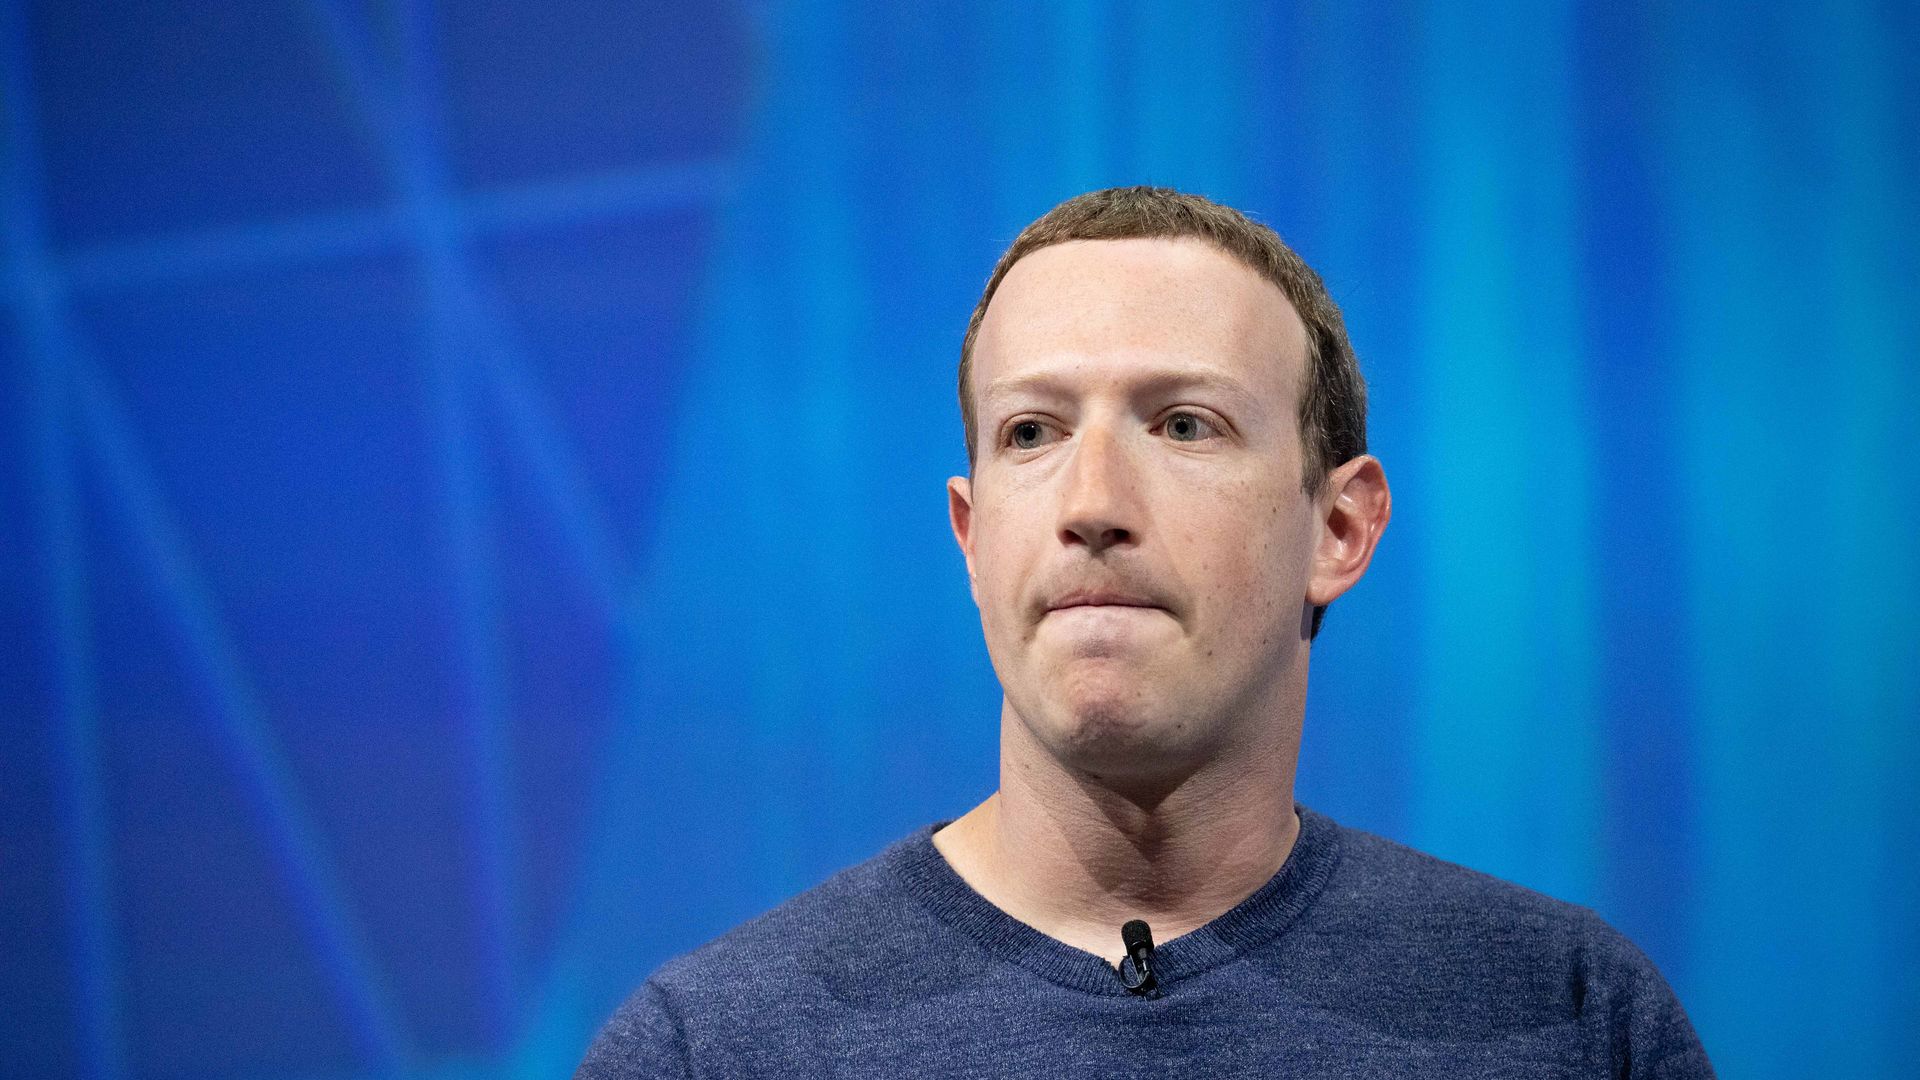 Mark Zuckerberg wearing a blue shirt before a blue background bites his lips frowning.